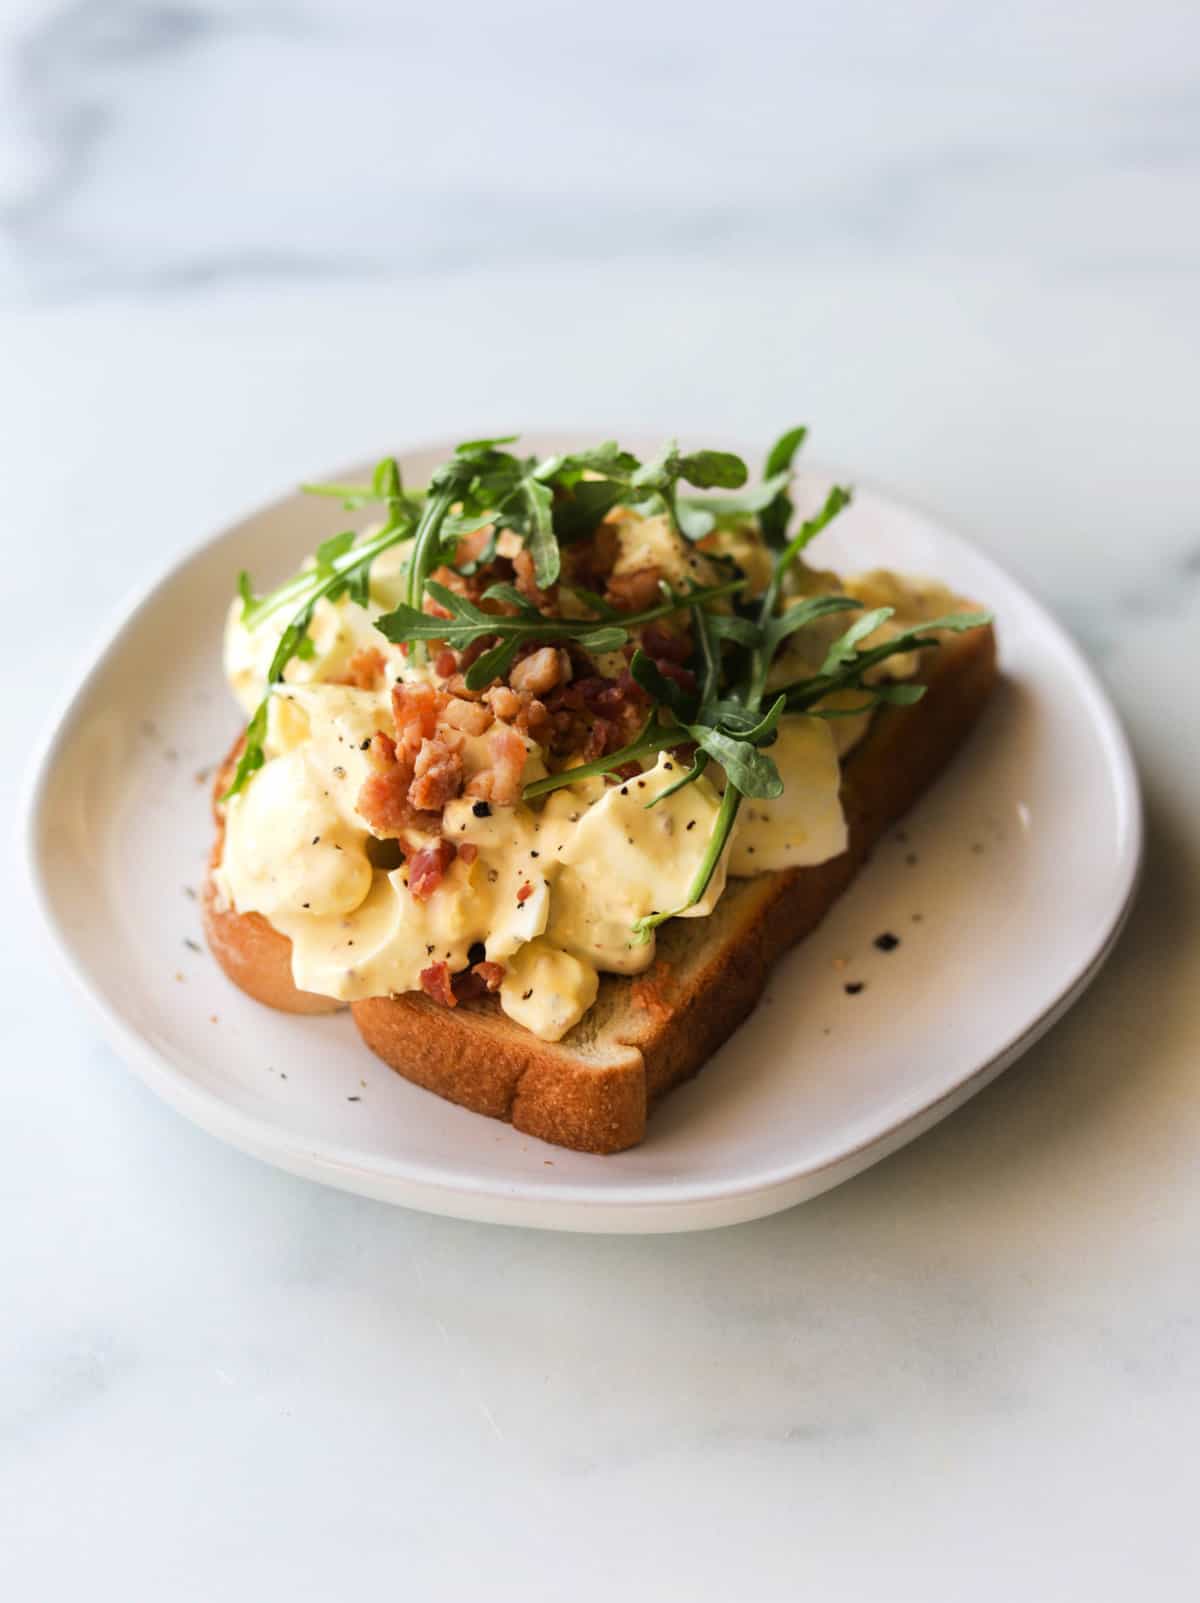 A side angled shot of an open faced egg salad sandwich.